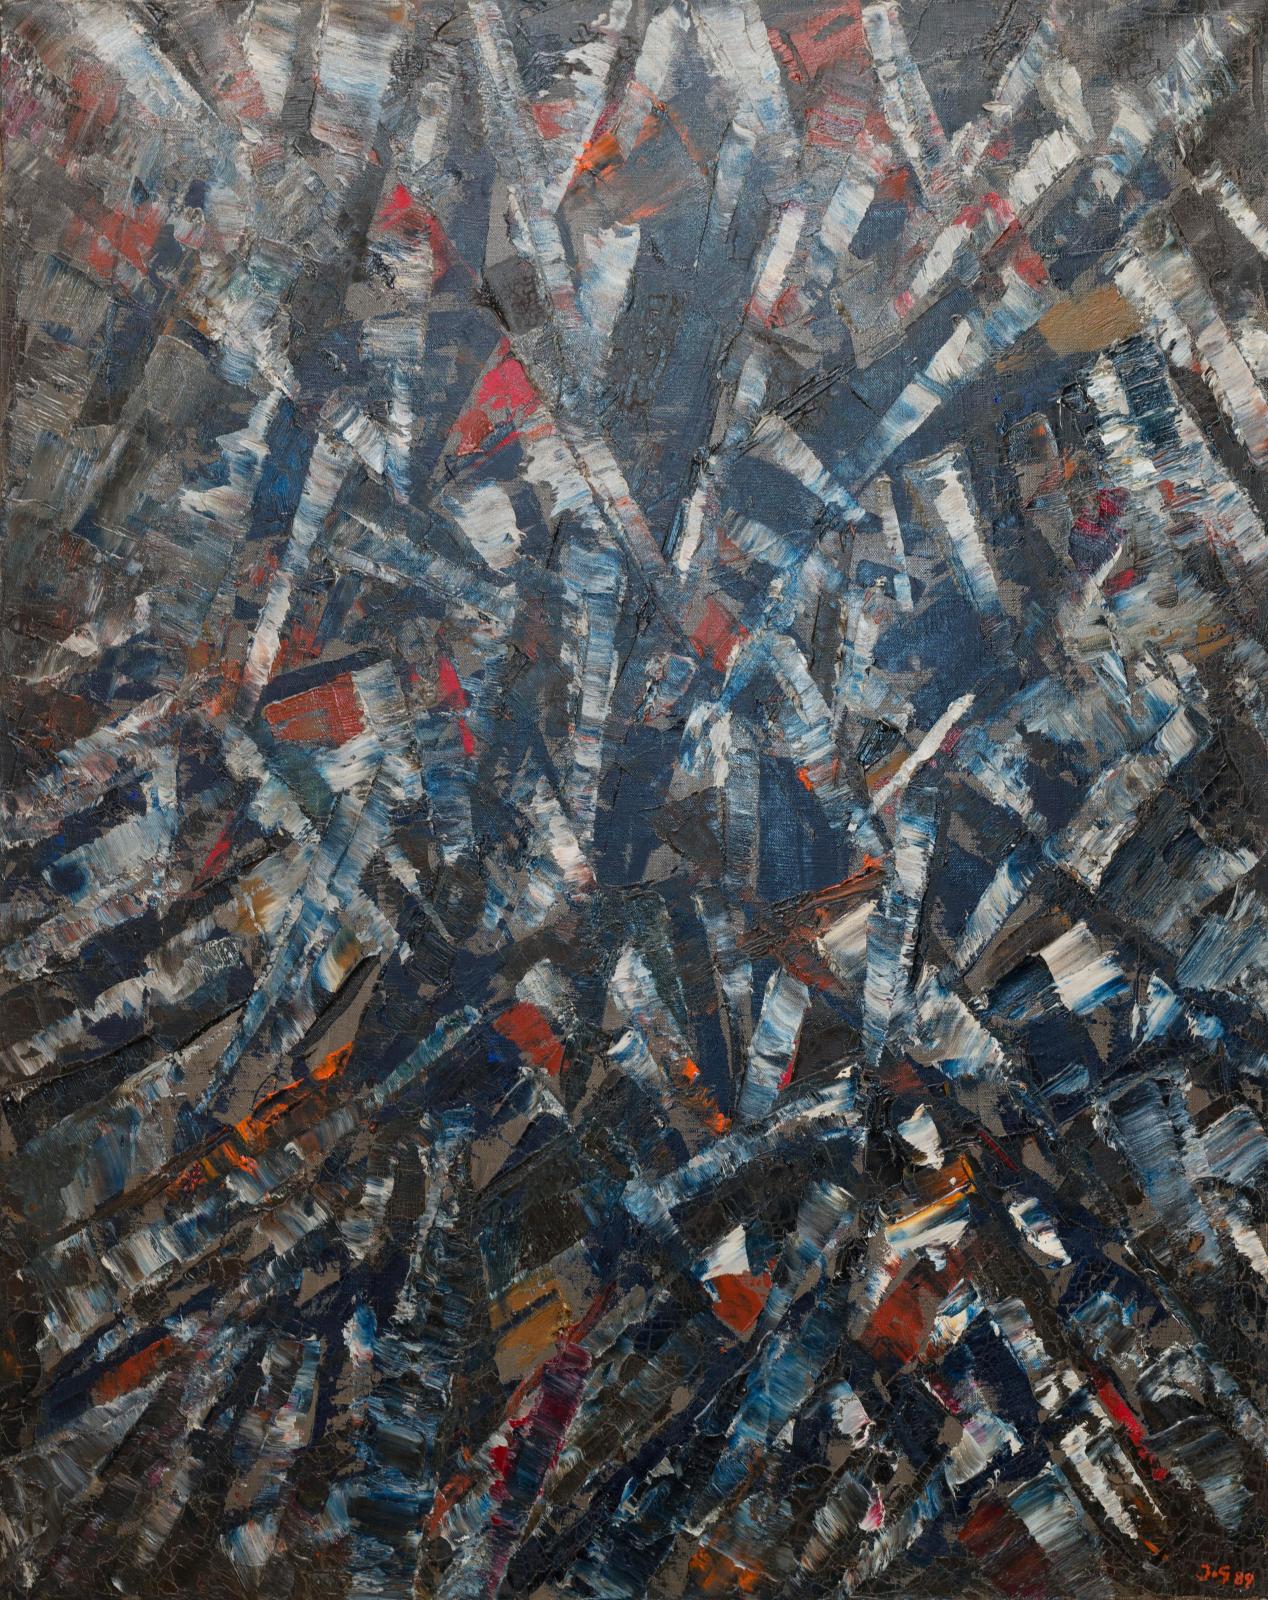 An abstract painting of sharp angular dark forms